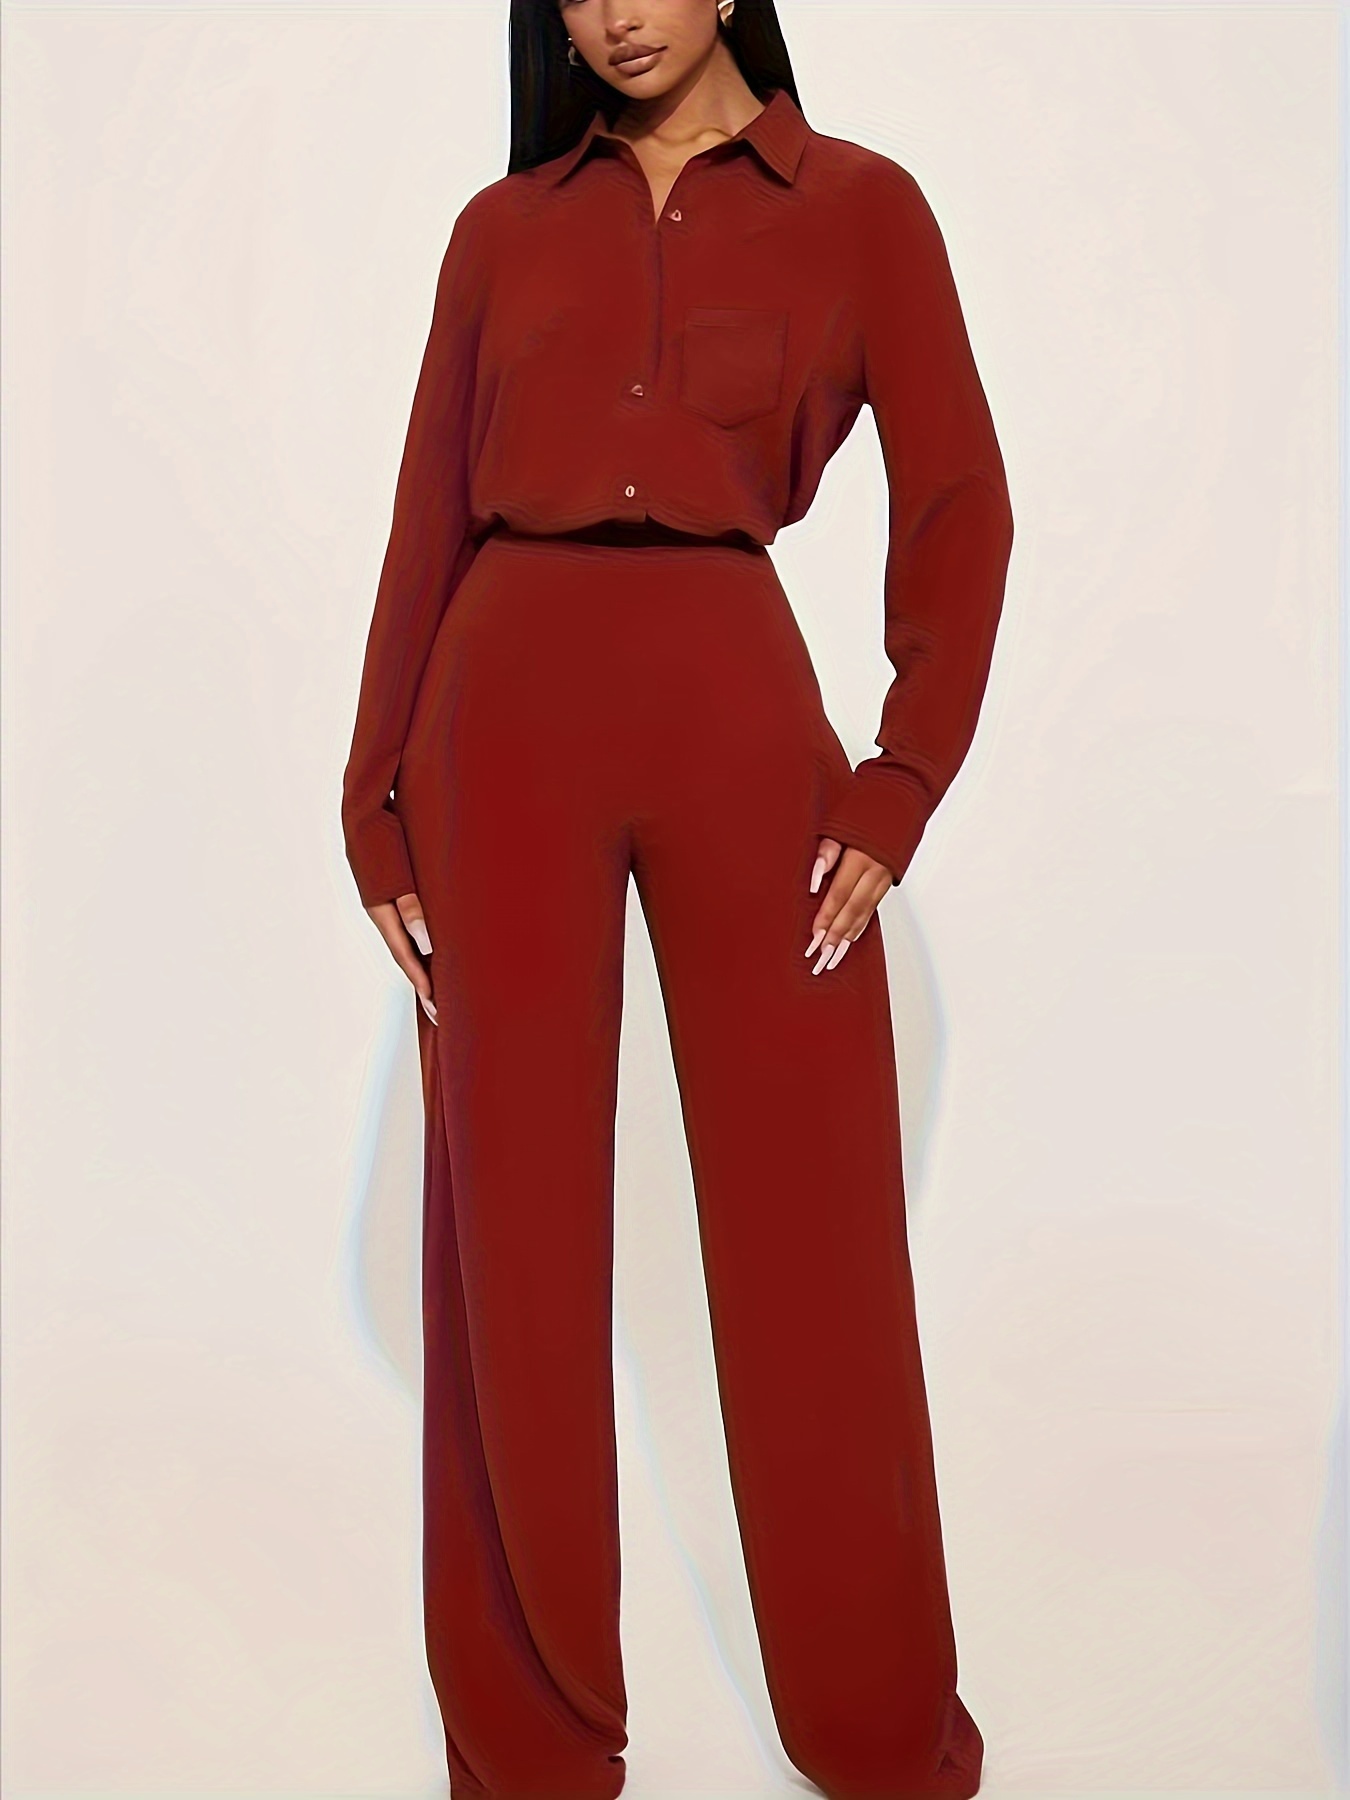 NKOOGH Wedding Guest Jumpsuit for Women Womens Pant Suit Petite Women 2  Piece Outfits Casual Long Sleeve Loose Fit Button Shirts Blouses Tops Wide  Leg